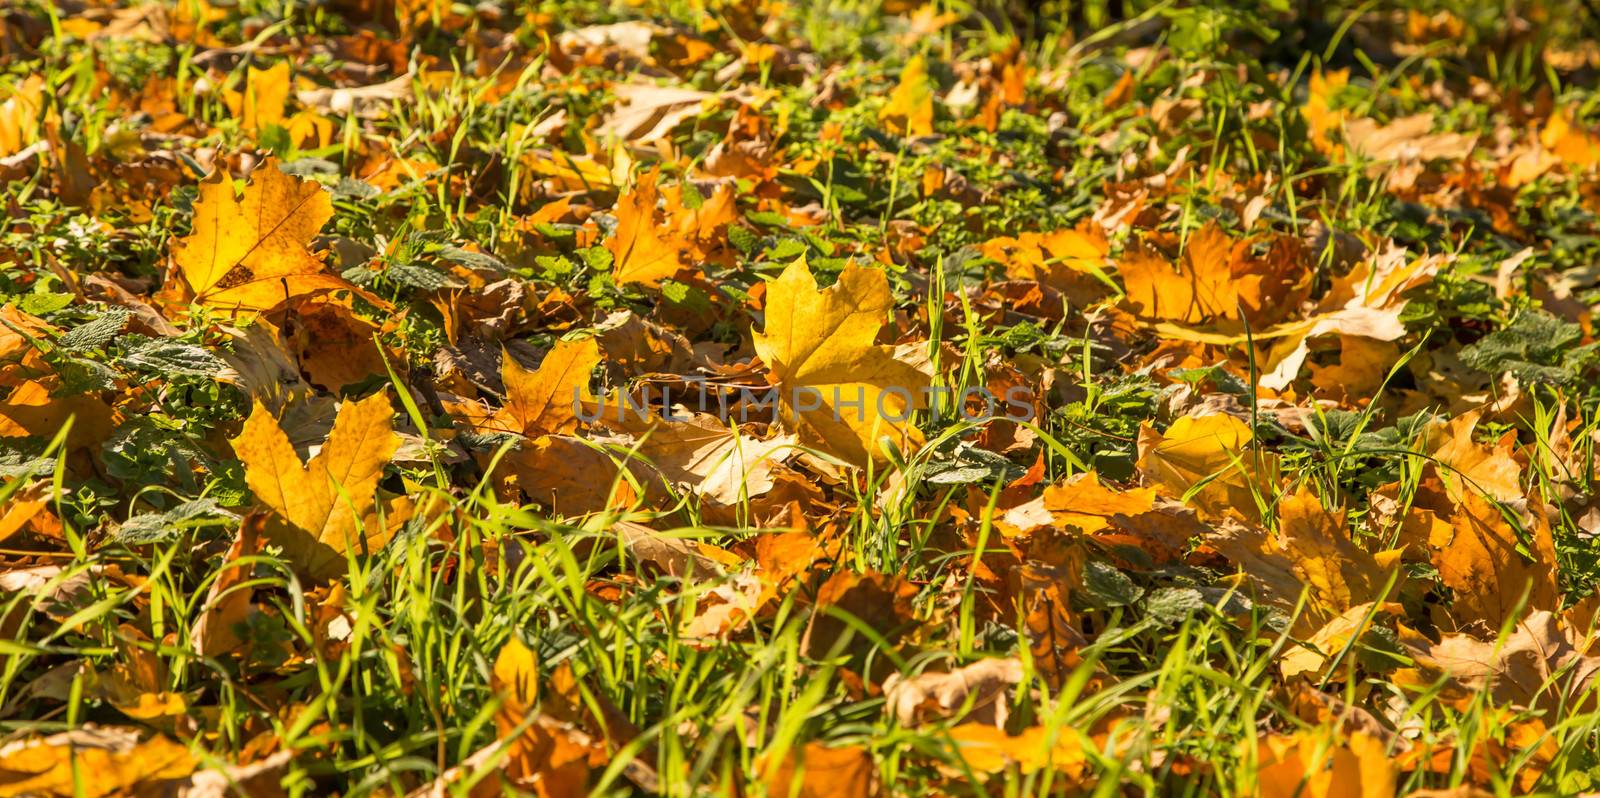 Landscape of colorful fall leaves on forest floor. Whole background